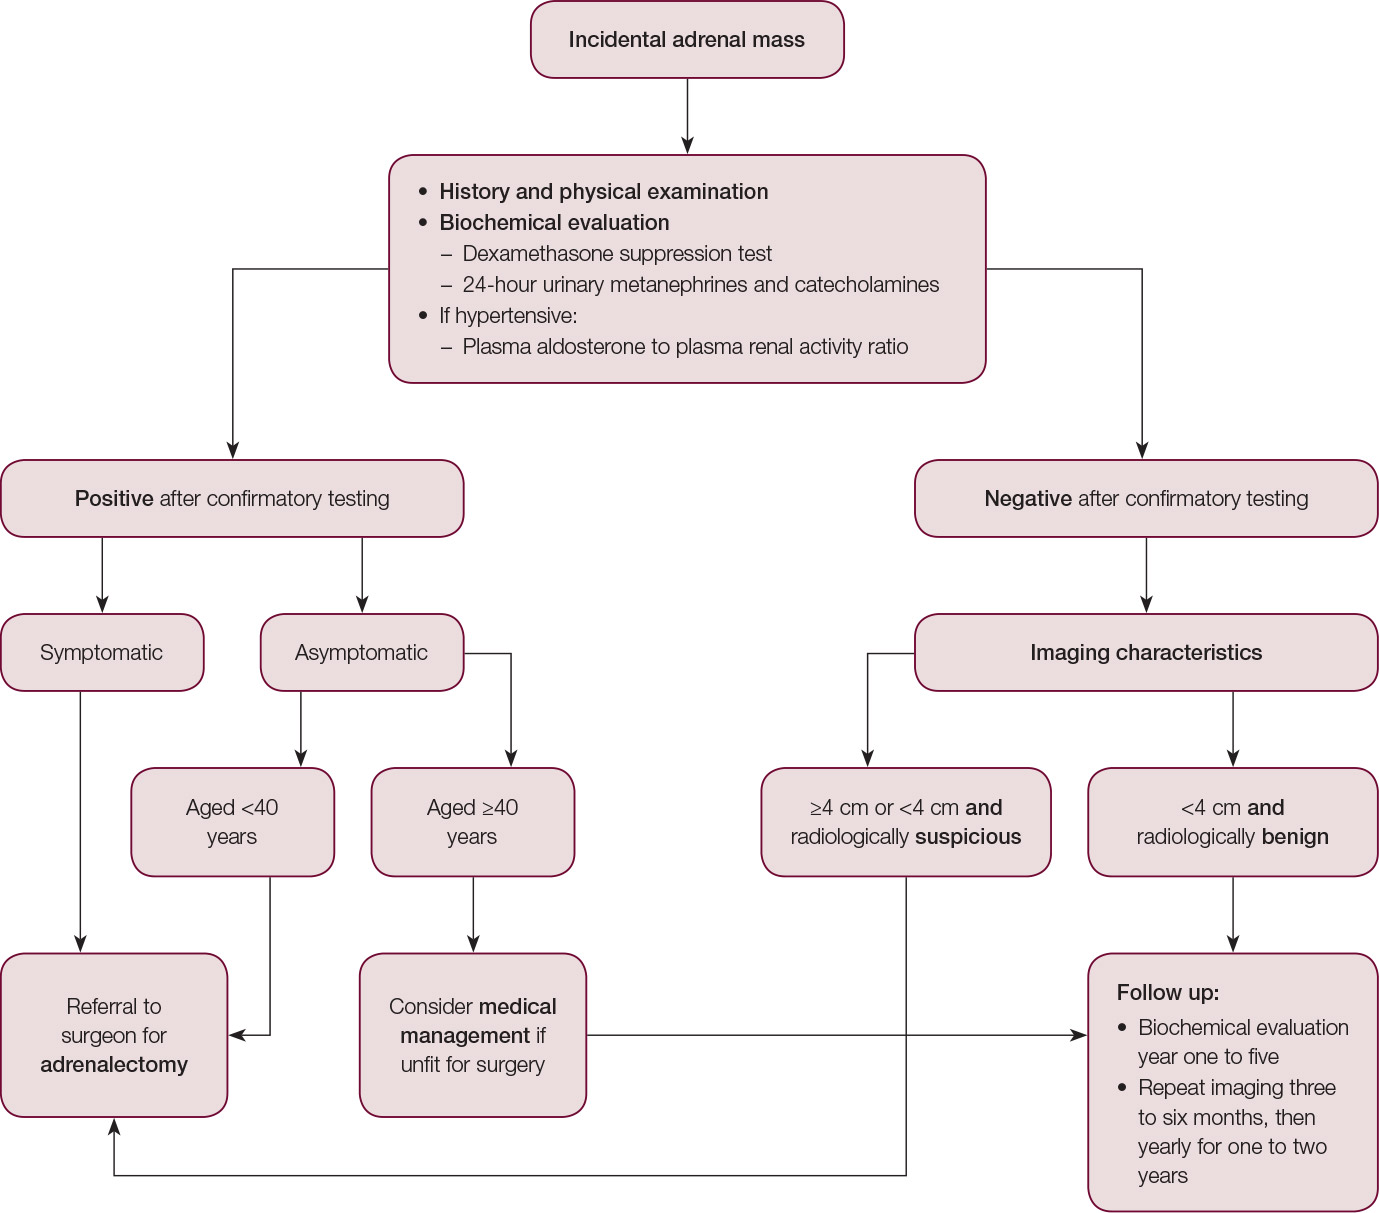 Figure 1 Algorithmic Approach To The Incidental Adrenal Lesion